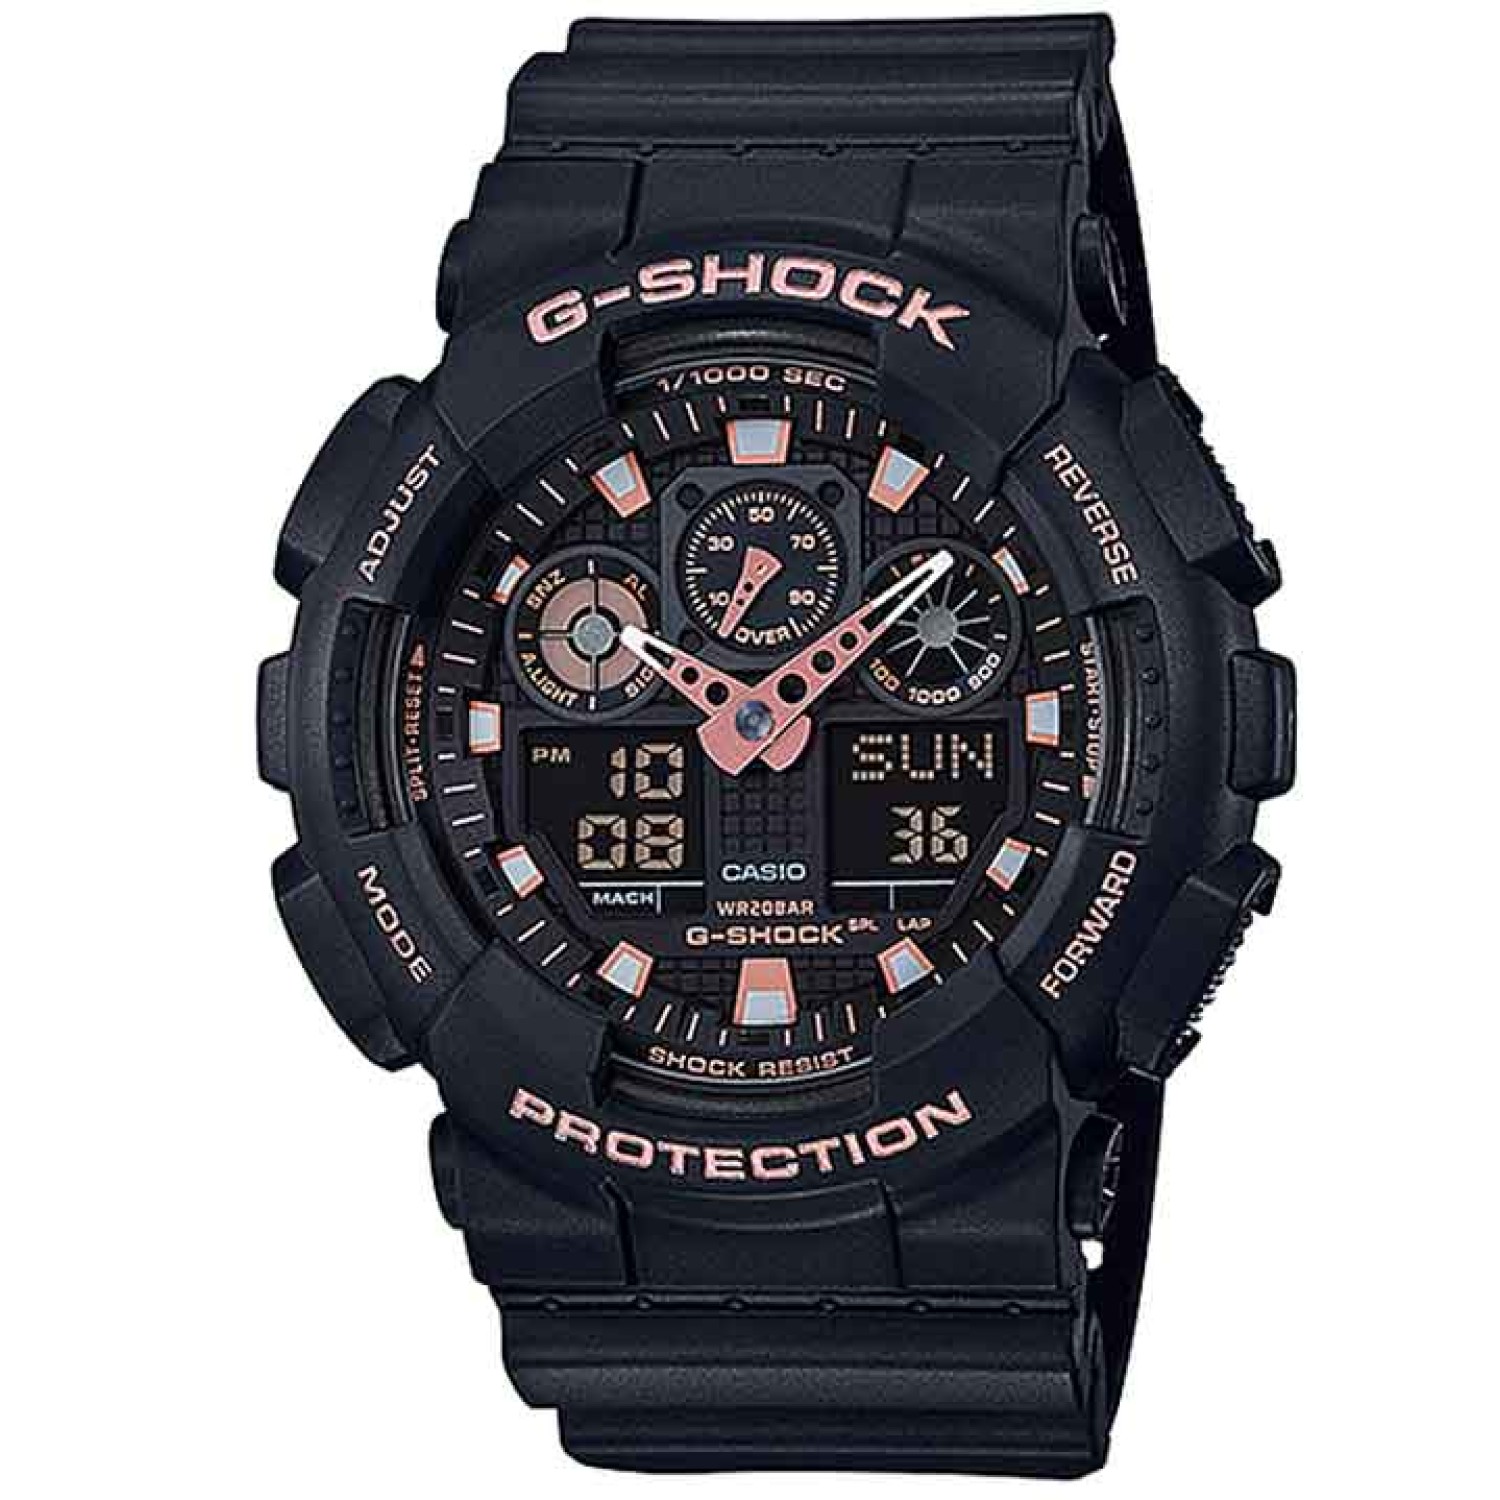 GA100GBX-1A4 Casio G-Shock Black and Rose Collection. G-Shock Japan have released  the GBX series in September 2017, a six-piece collection featuring three pairs of classic models with complementary black/gold and black/rose gold colour schemes. Available